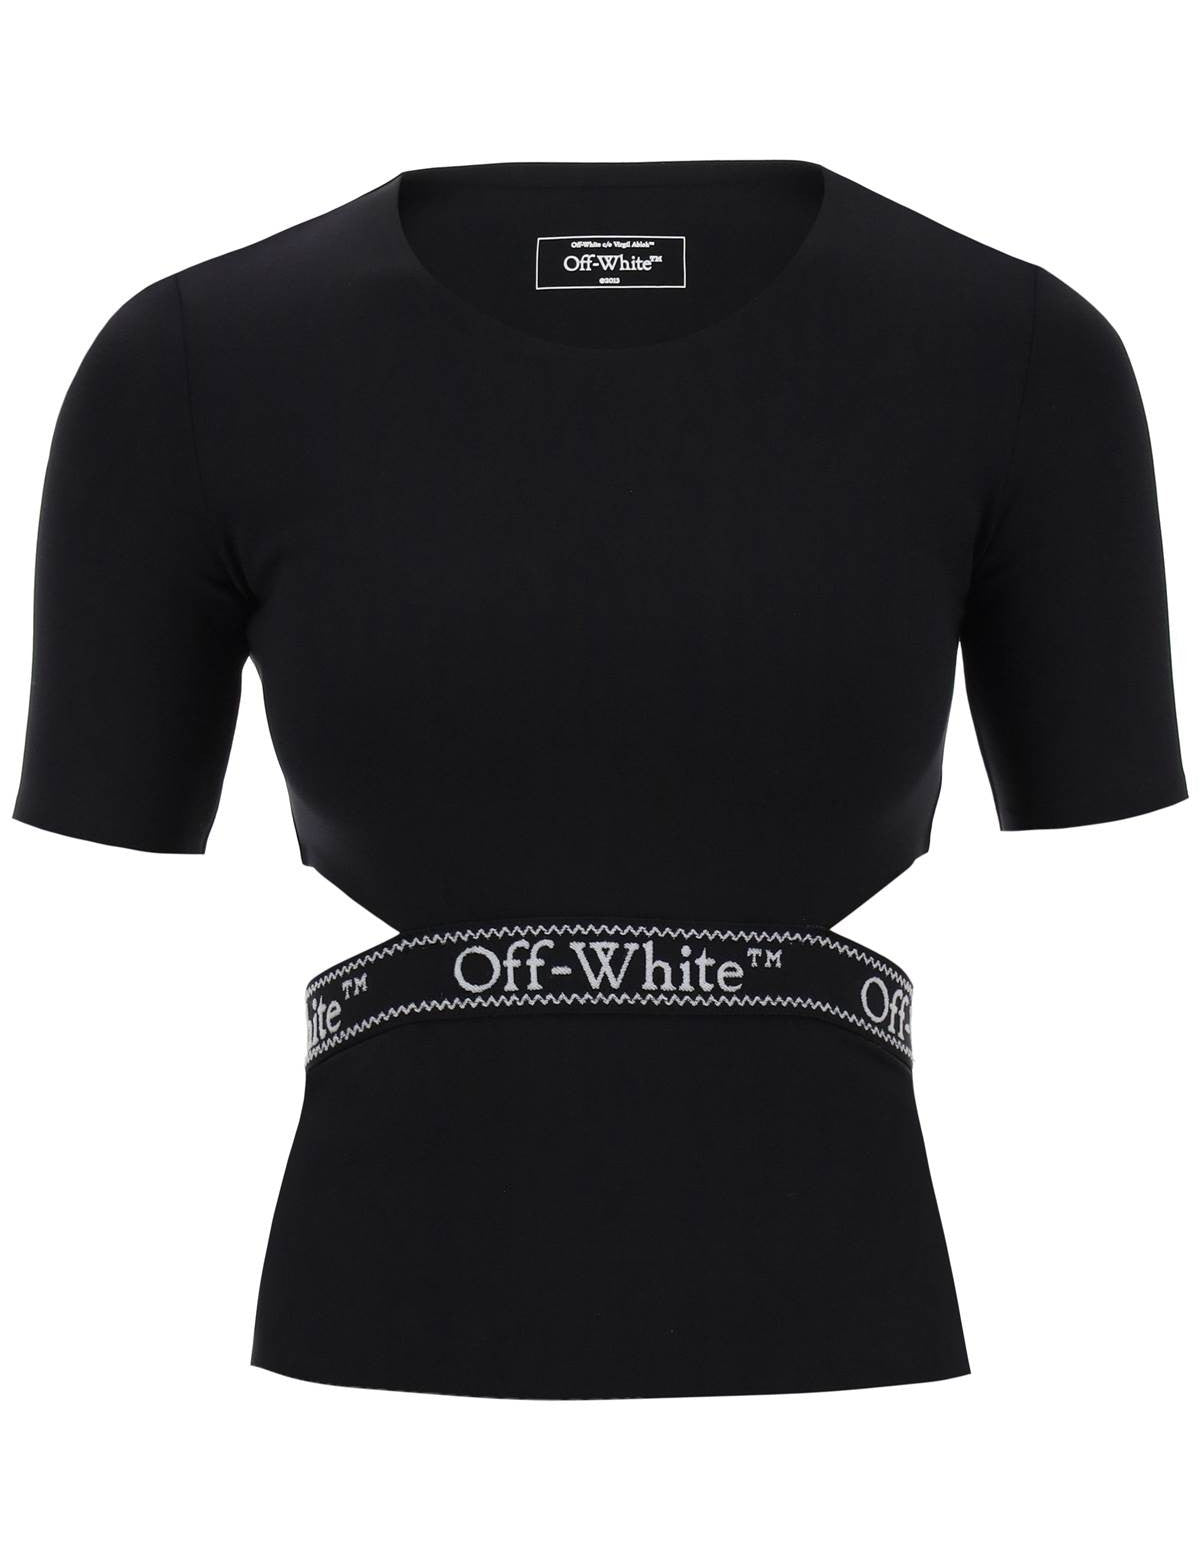 off-white-logo-band-t-shirt-with-cut-out-design.jpg